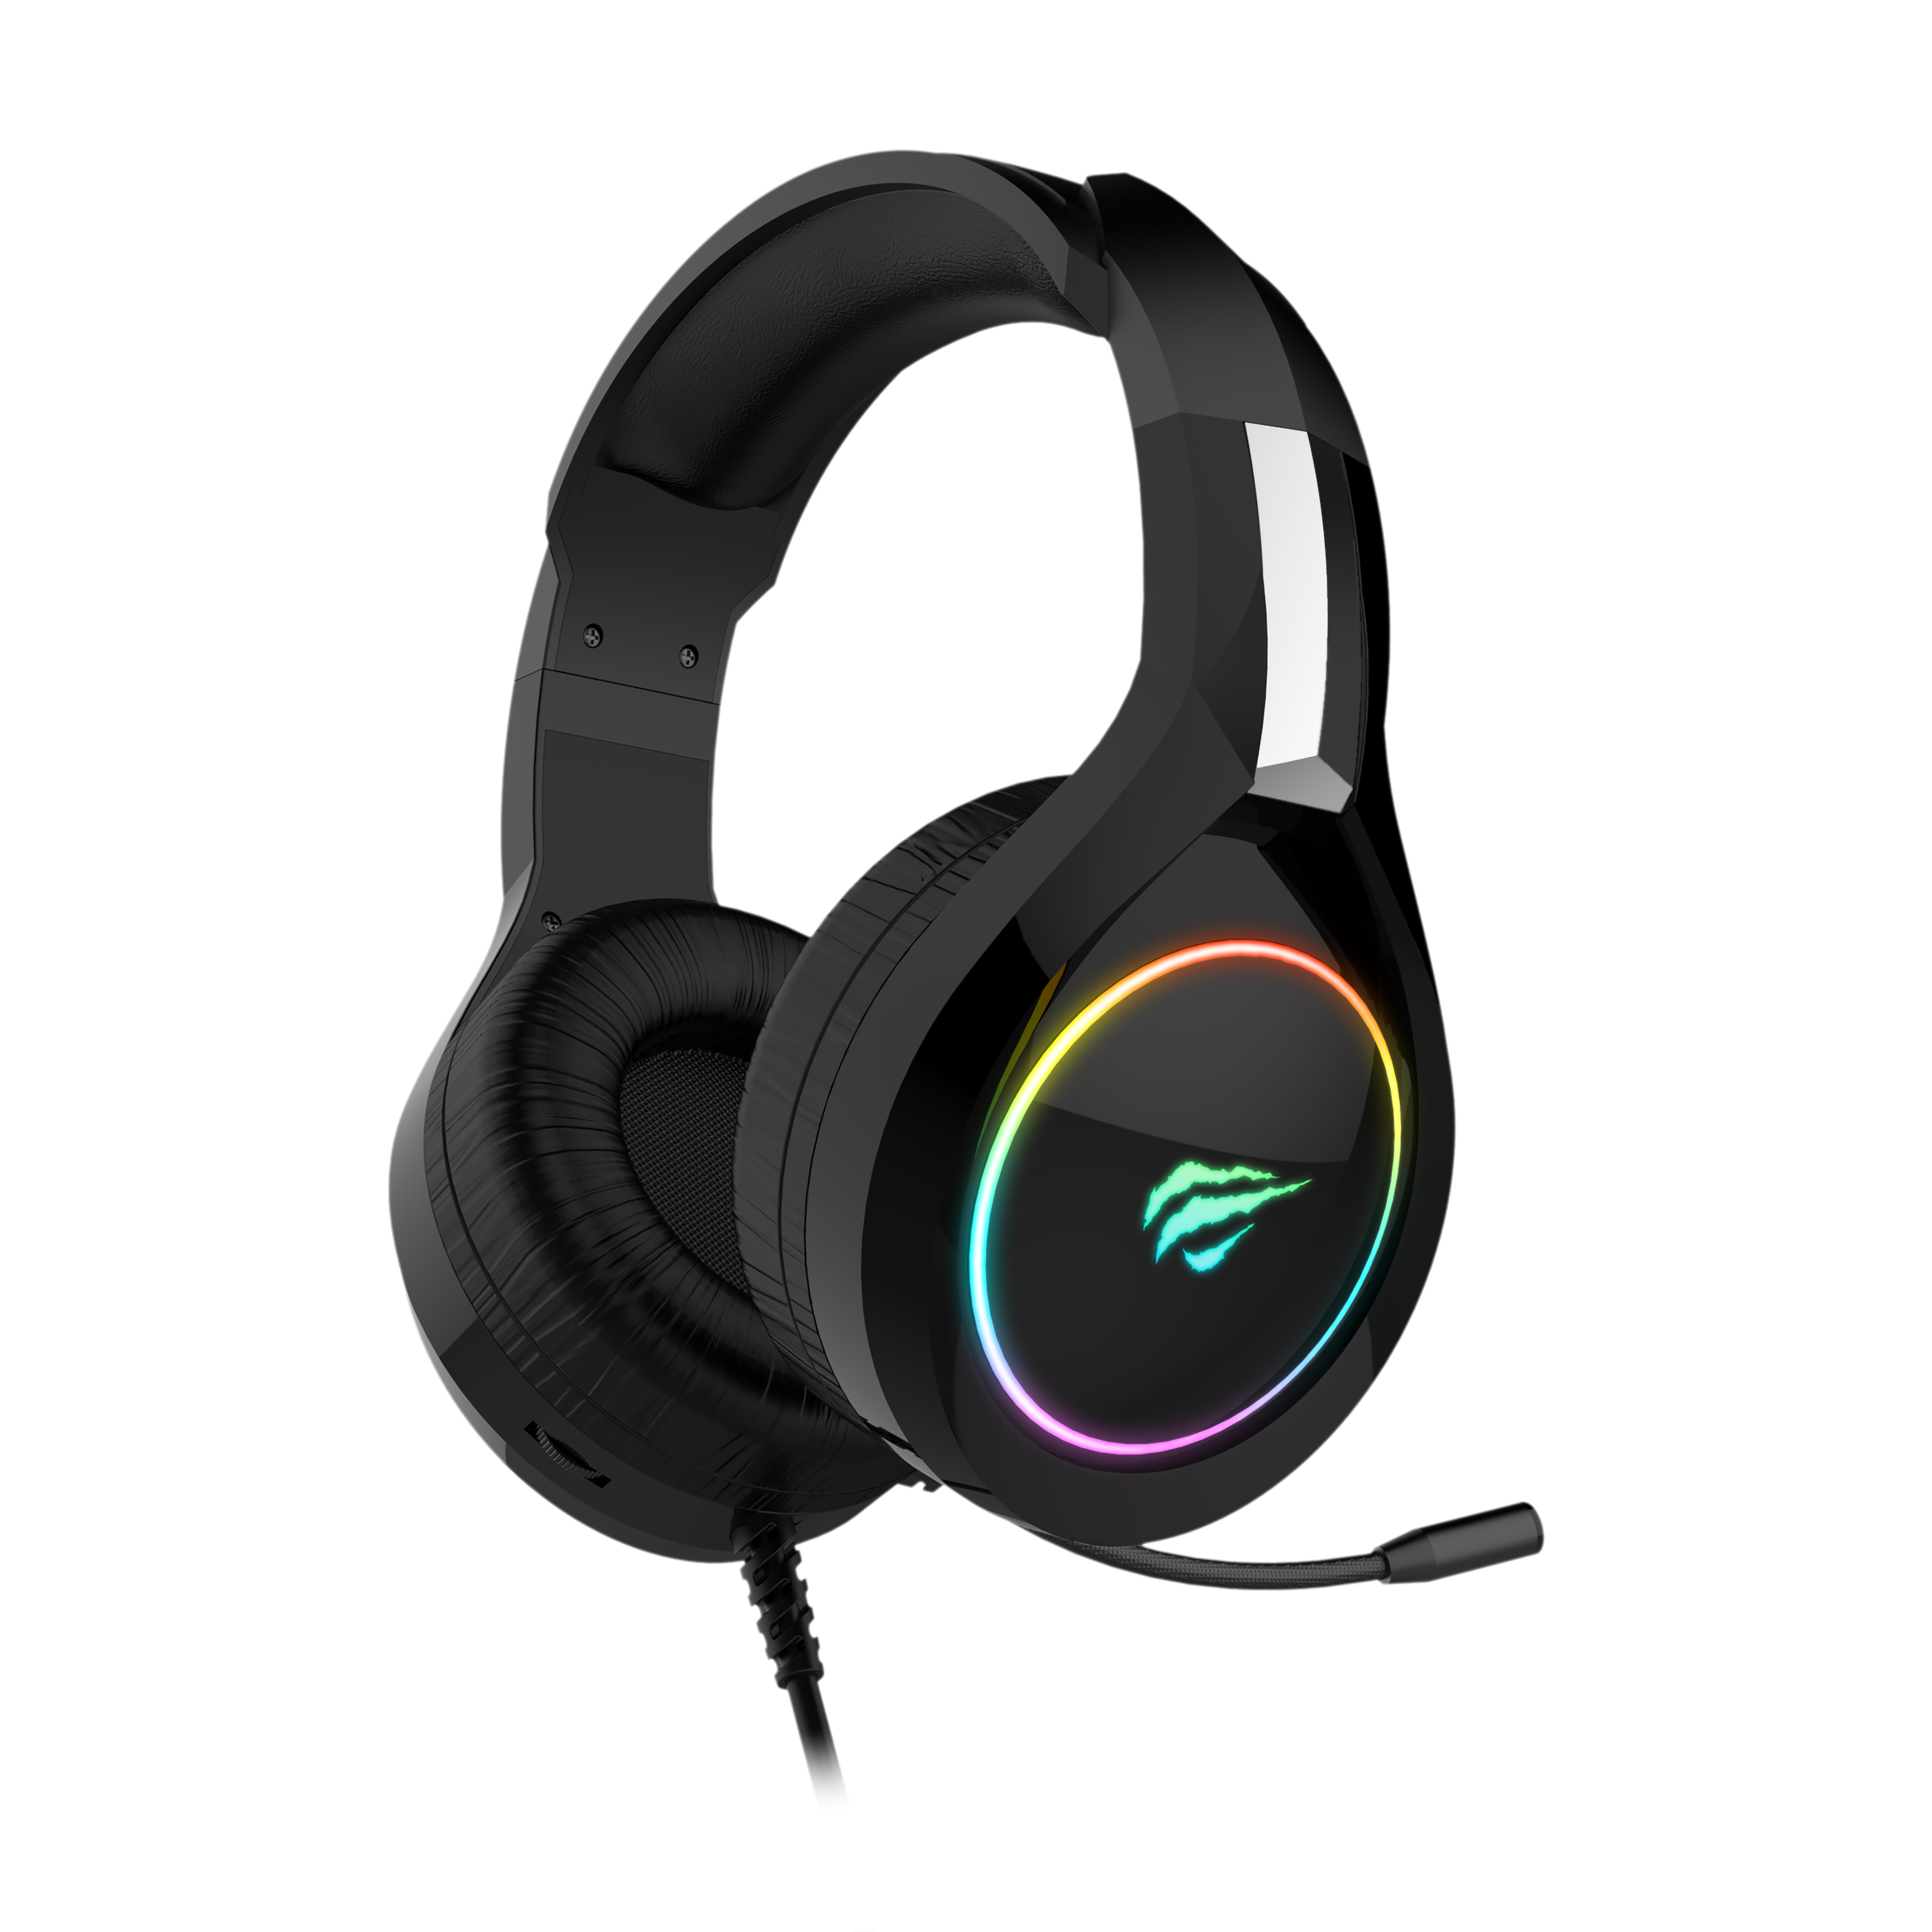 Havit H2232D 3.5MM Over-ear Headphone Headband Wired Auriculares Gamer Rgb Headset Headphones Gaming With Detachable Microphone